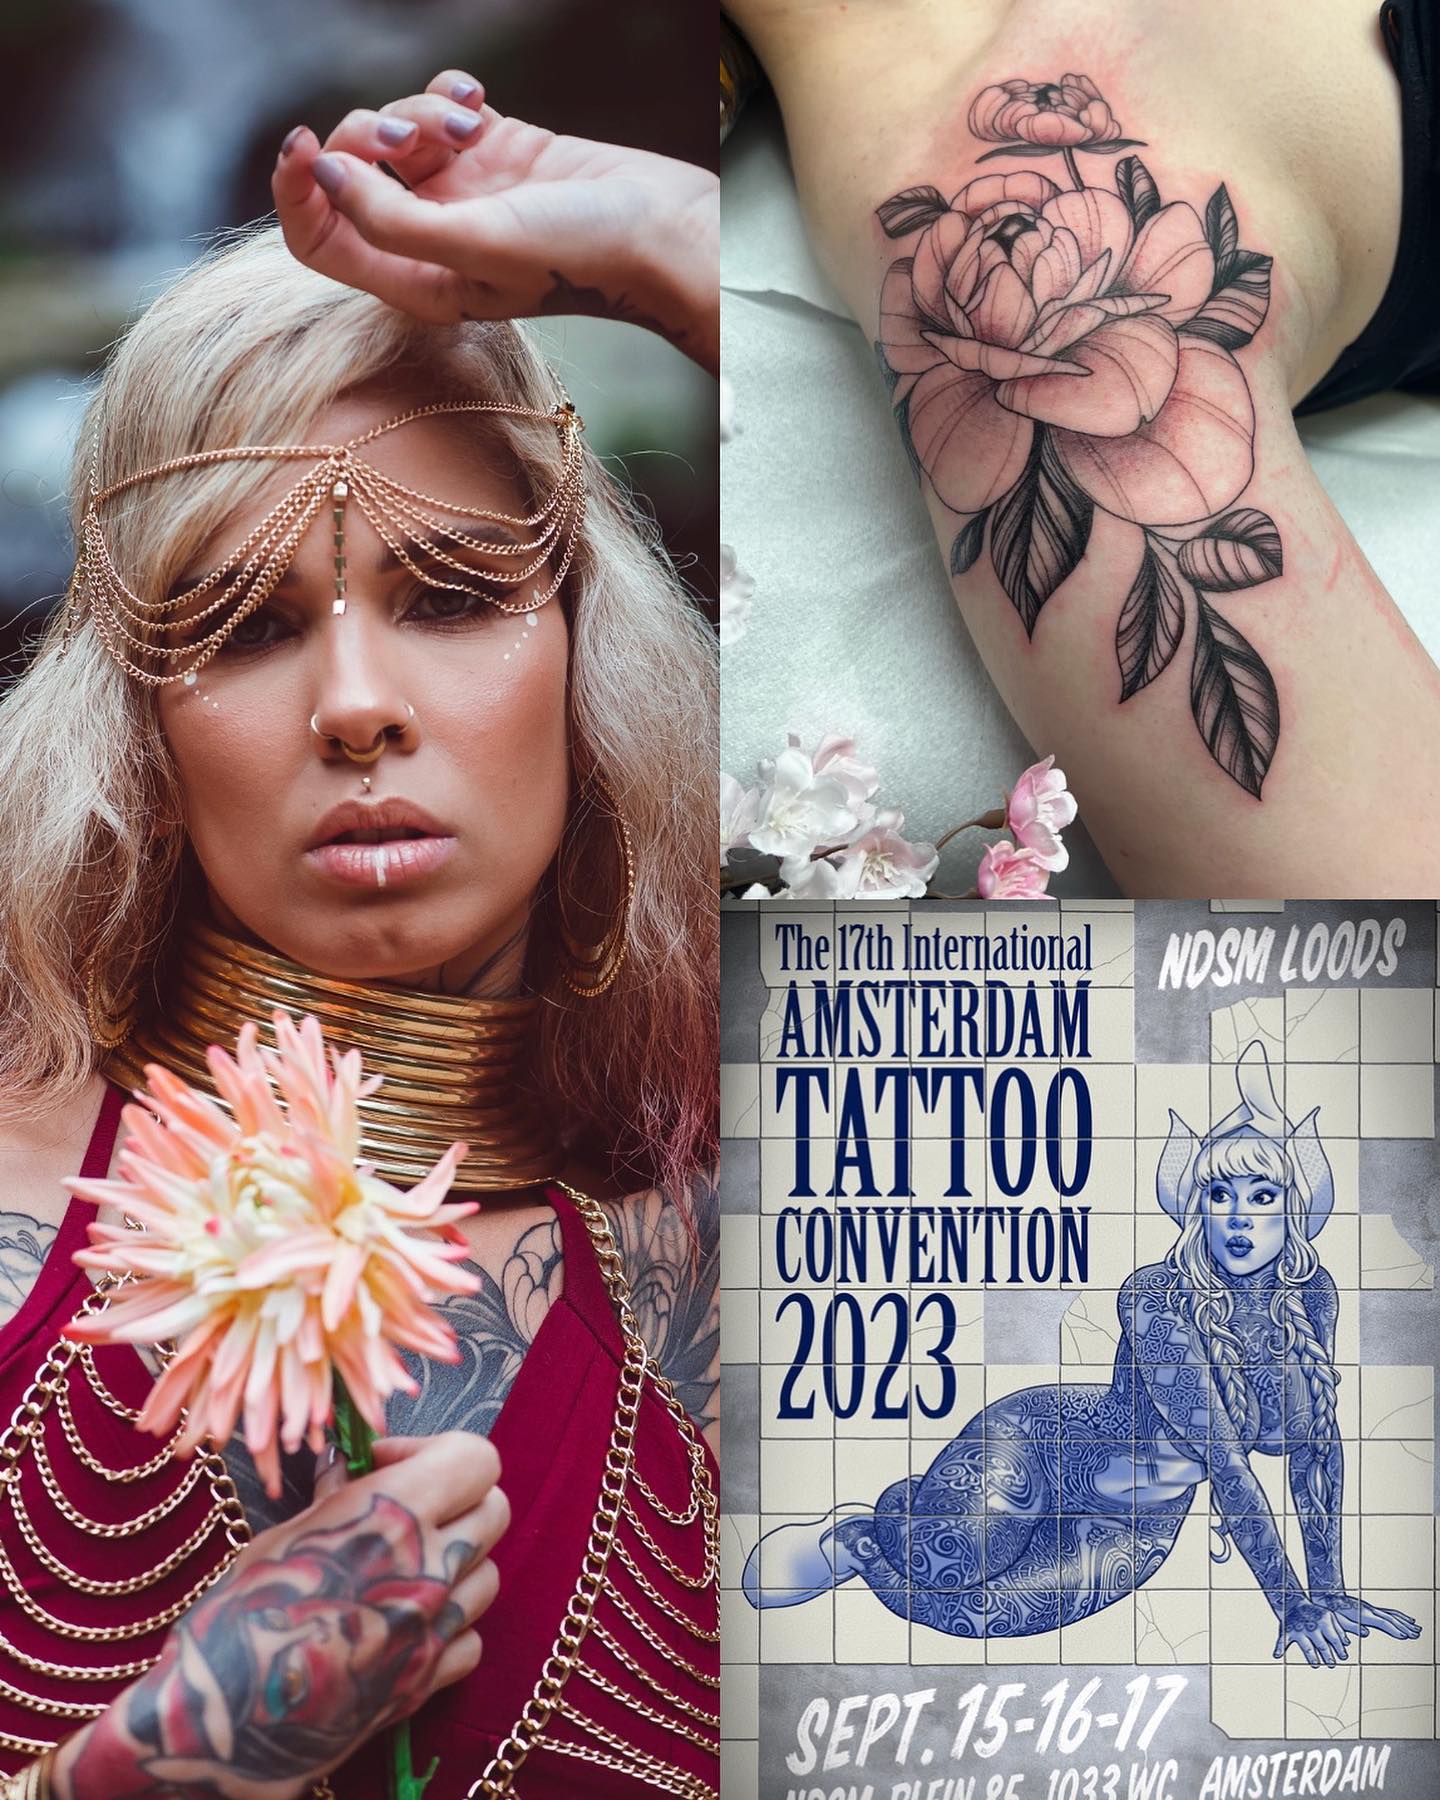 I will be working at the great Amsterdam Tattoo Convention on the 15th/16th/17th of September!!!💁🏼‍♀️ amsterdamtattooconvention 

If you would like to enquire please email me your idea /placement / size and availability to: thaisblanc.artworkgmail.com

See you there!!! x

•
•
•
•
•
•
•
•
•
•
•
•
•
•
•
•
•
•
•

                        